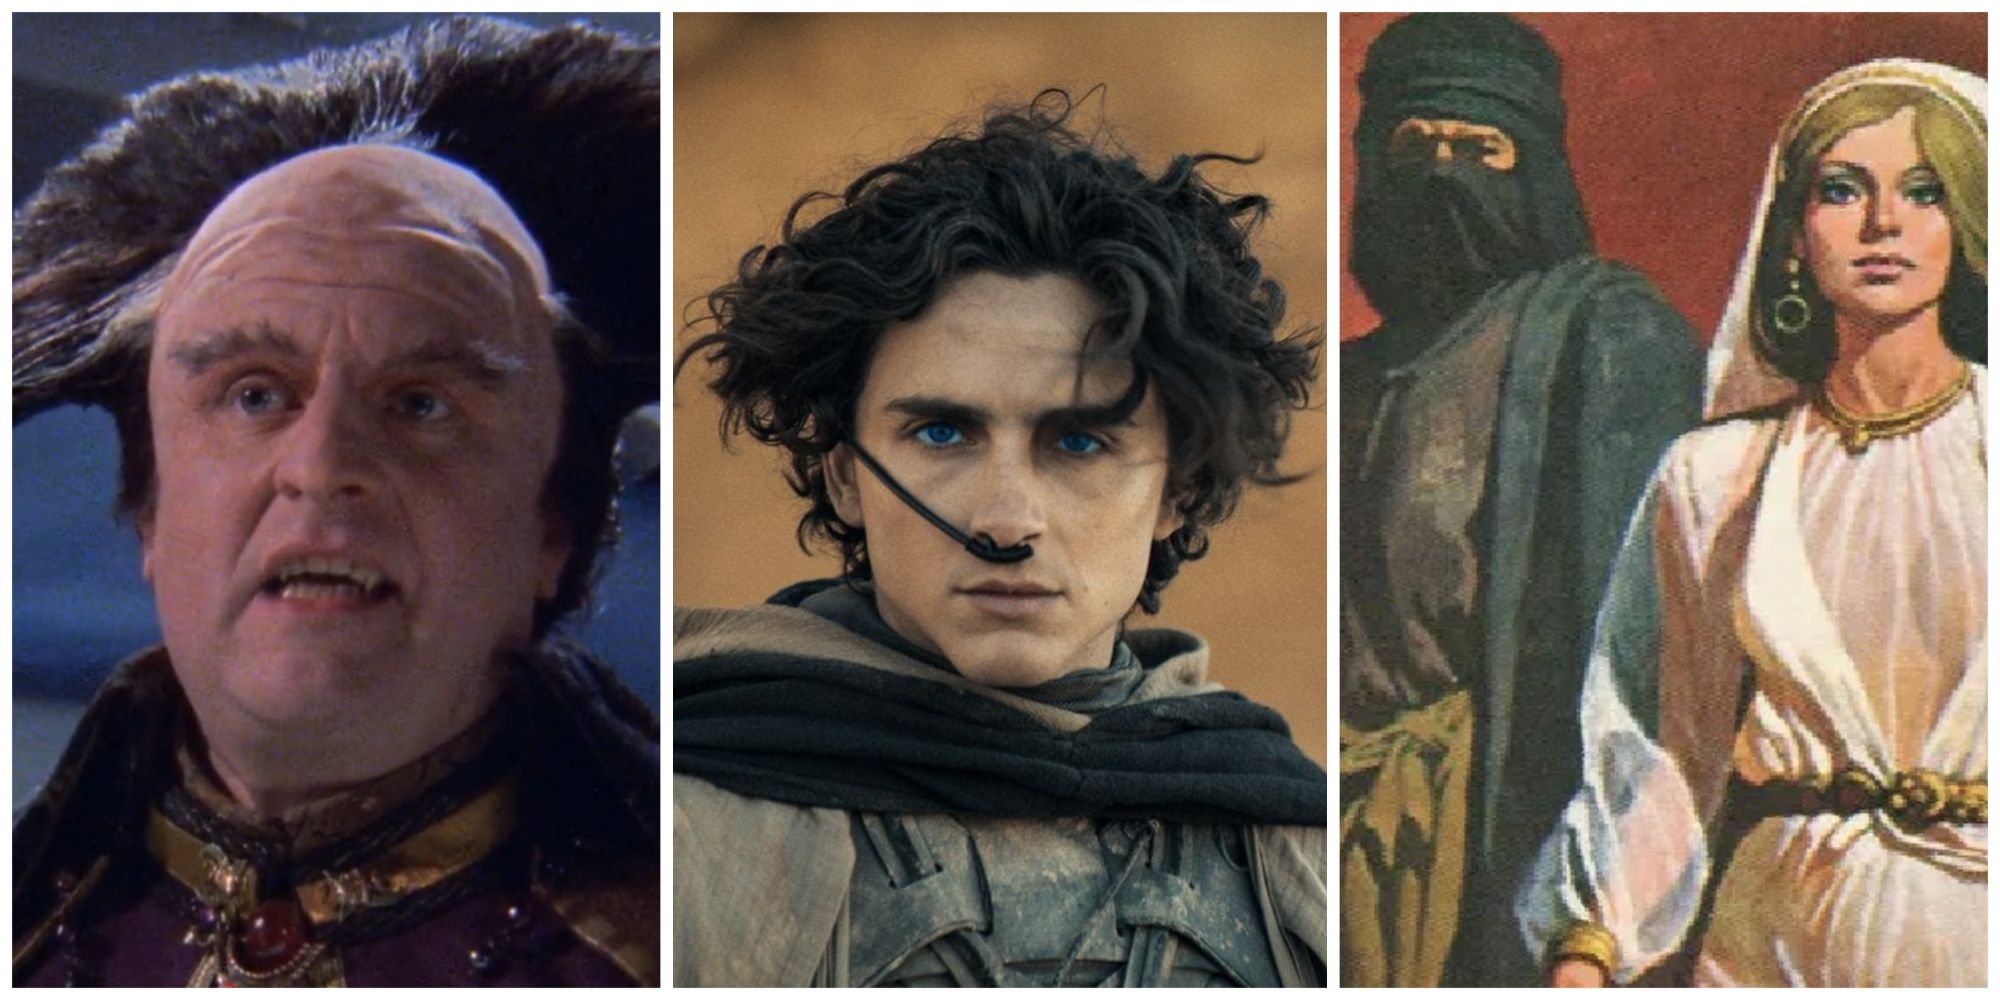 Split image showing Timothee Chalamet from Dune in the middle, flanked by images from Babylon 5 and The Faded Sun trilogy.